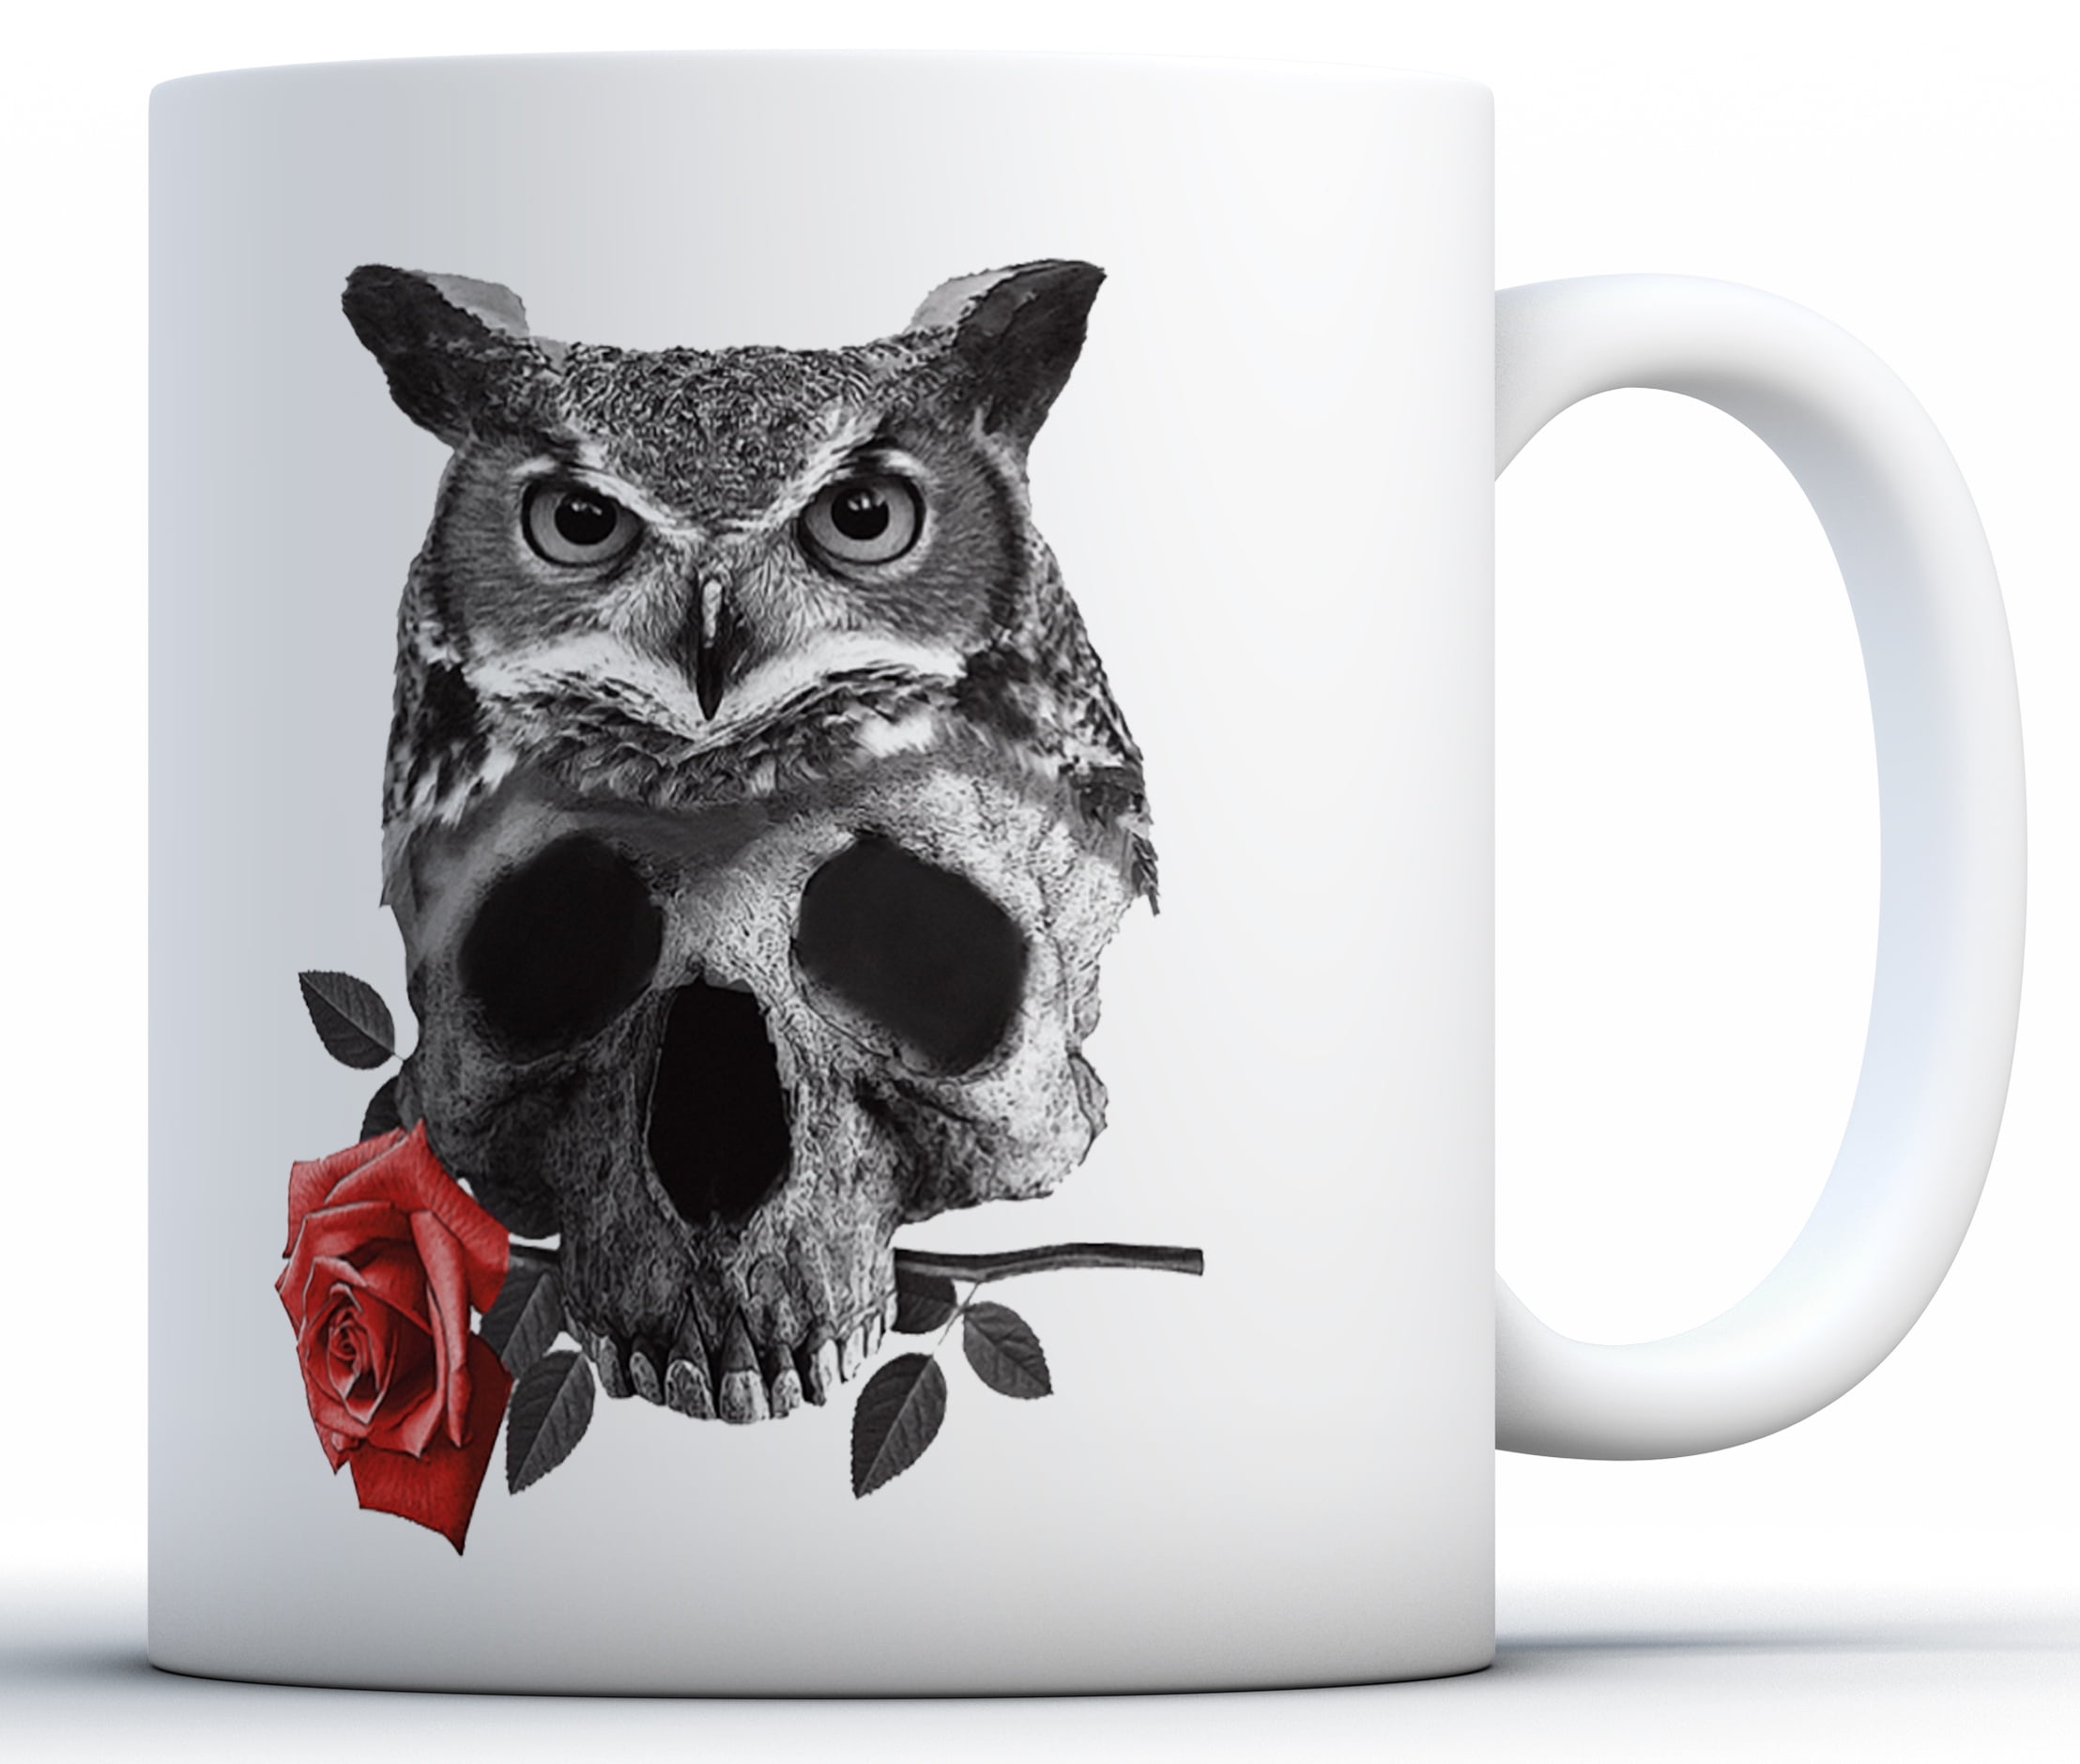 Details about   Day of the Dead DOD Sugar Skull Black Cup Coffee Mug